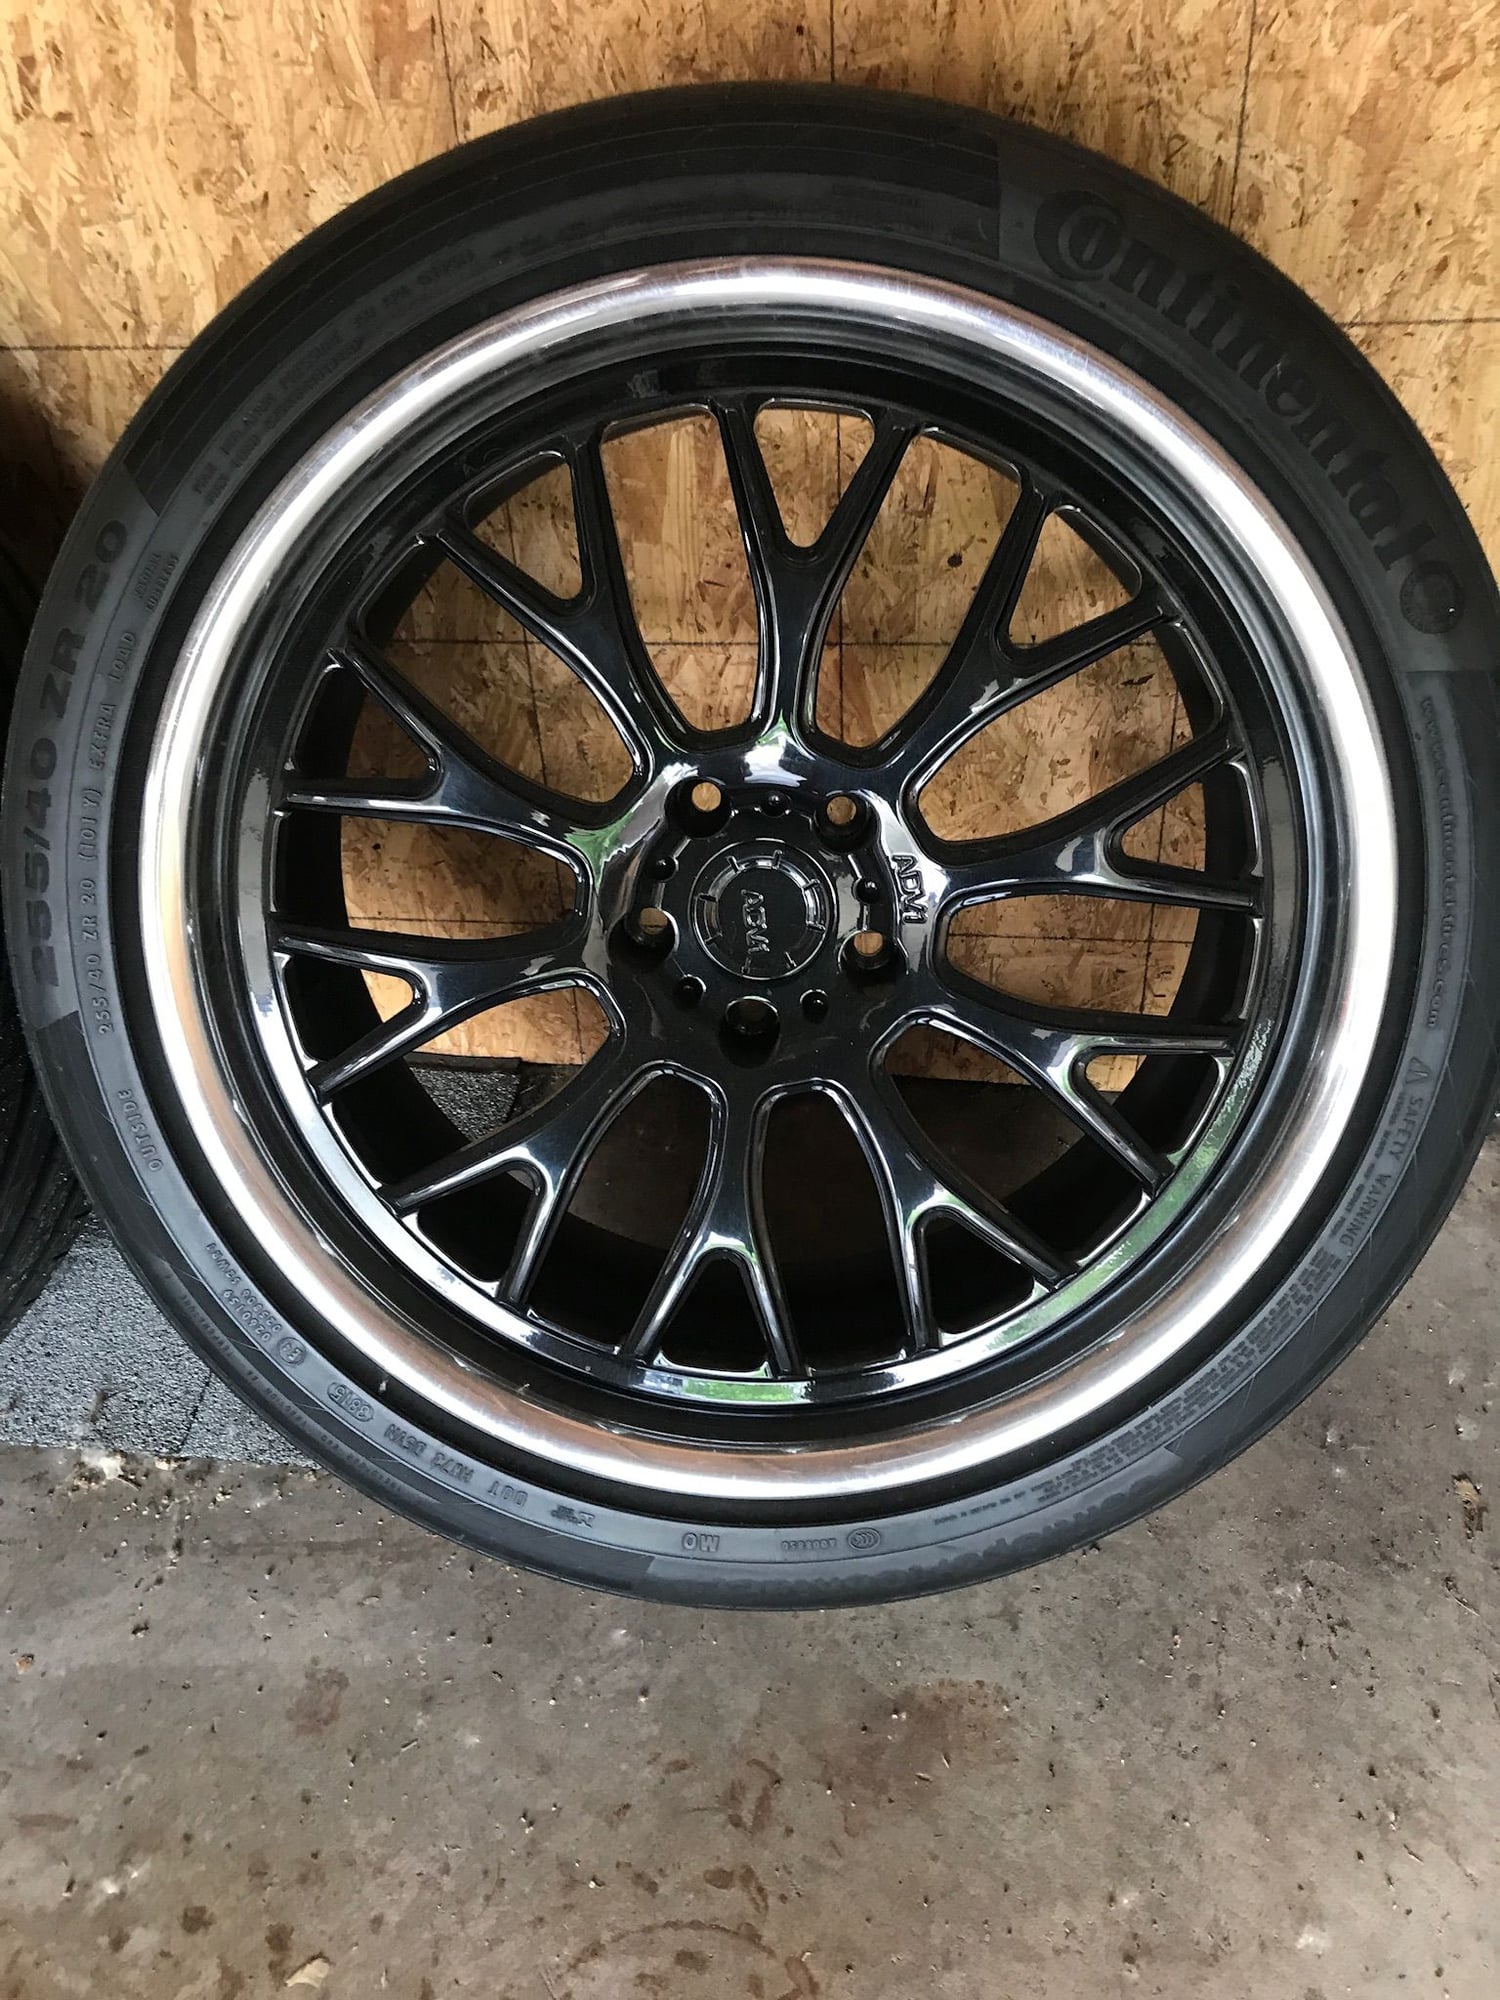 Wheels and Tires/Axles - 20" ADV1 wheels for 222 or 221 S class - Used - 2007 to 2018 Mercedes-Benz S63 AMG - 2007 to 2018 Mercedes-Benz S550 - Buffalo, NY 14150, United States